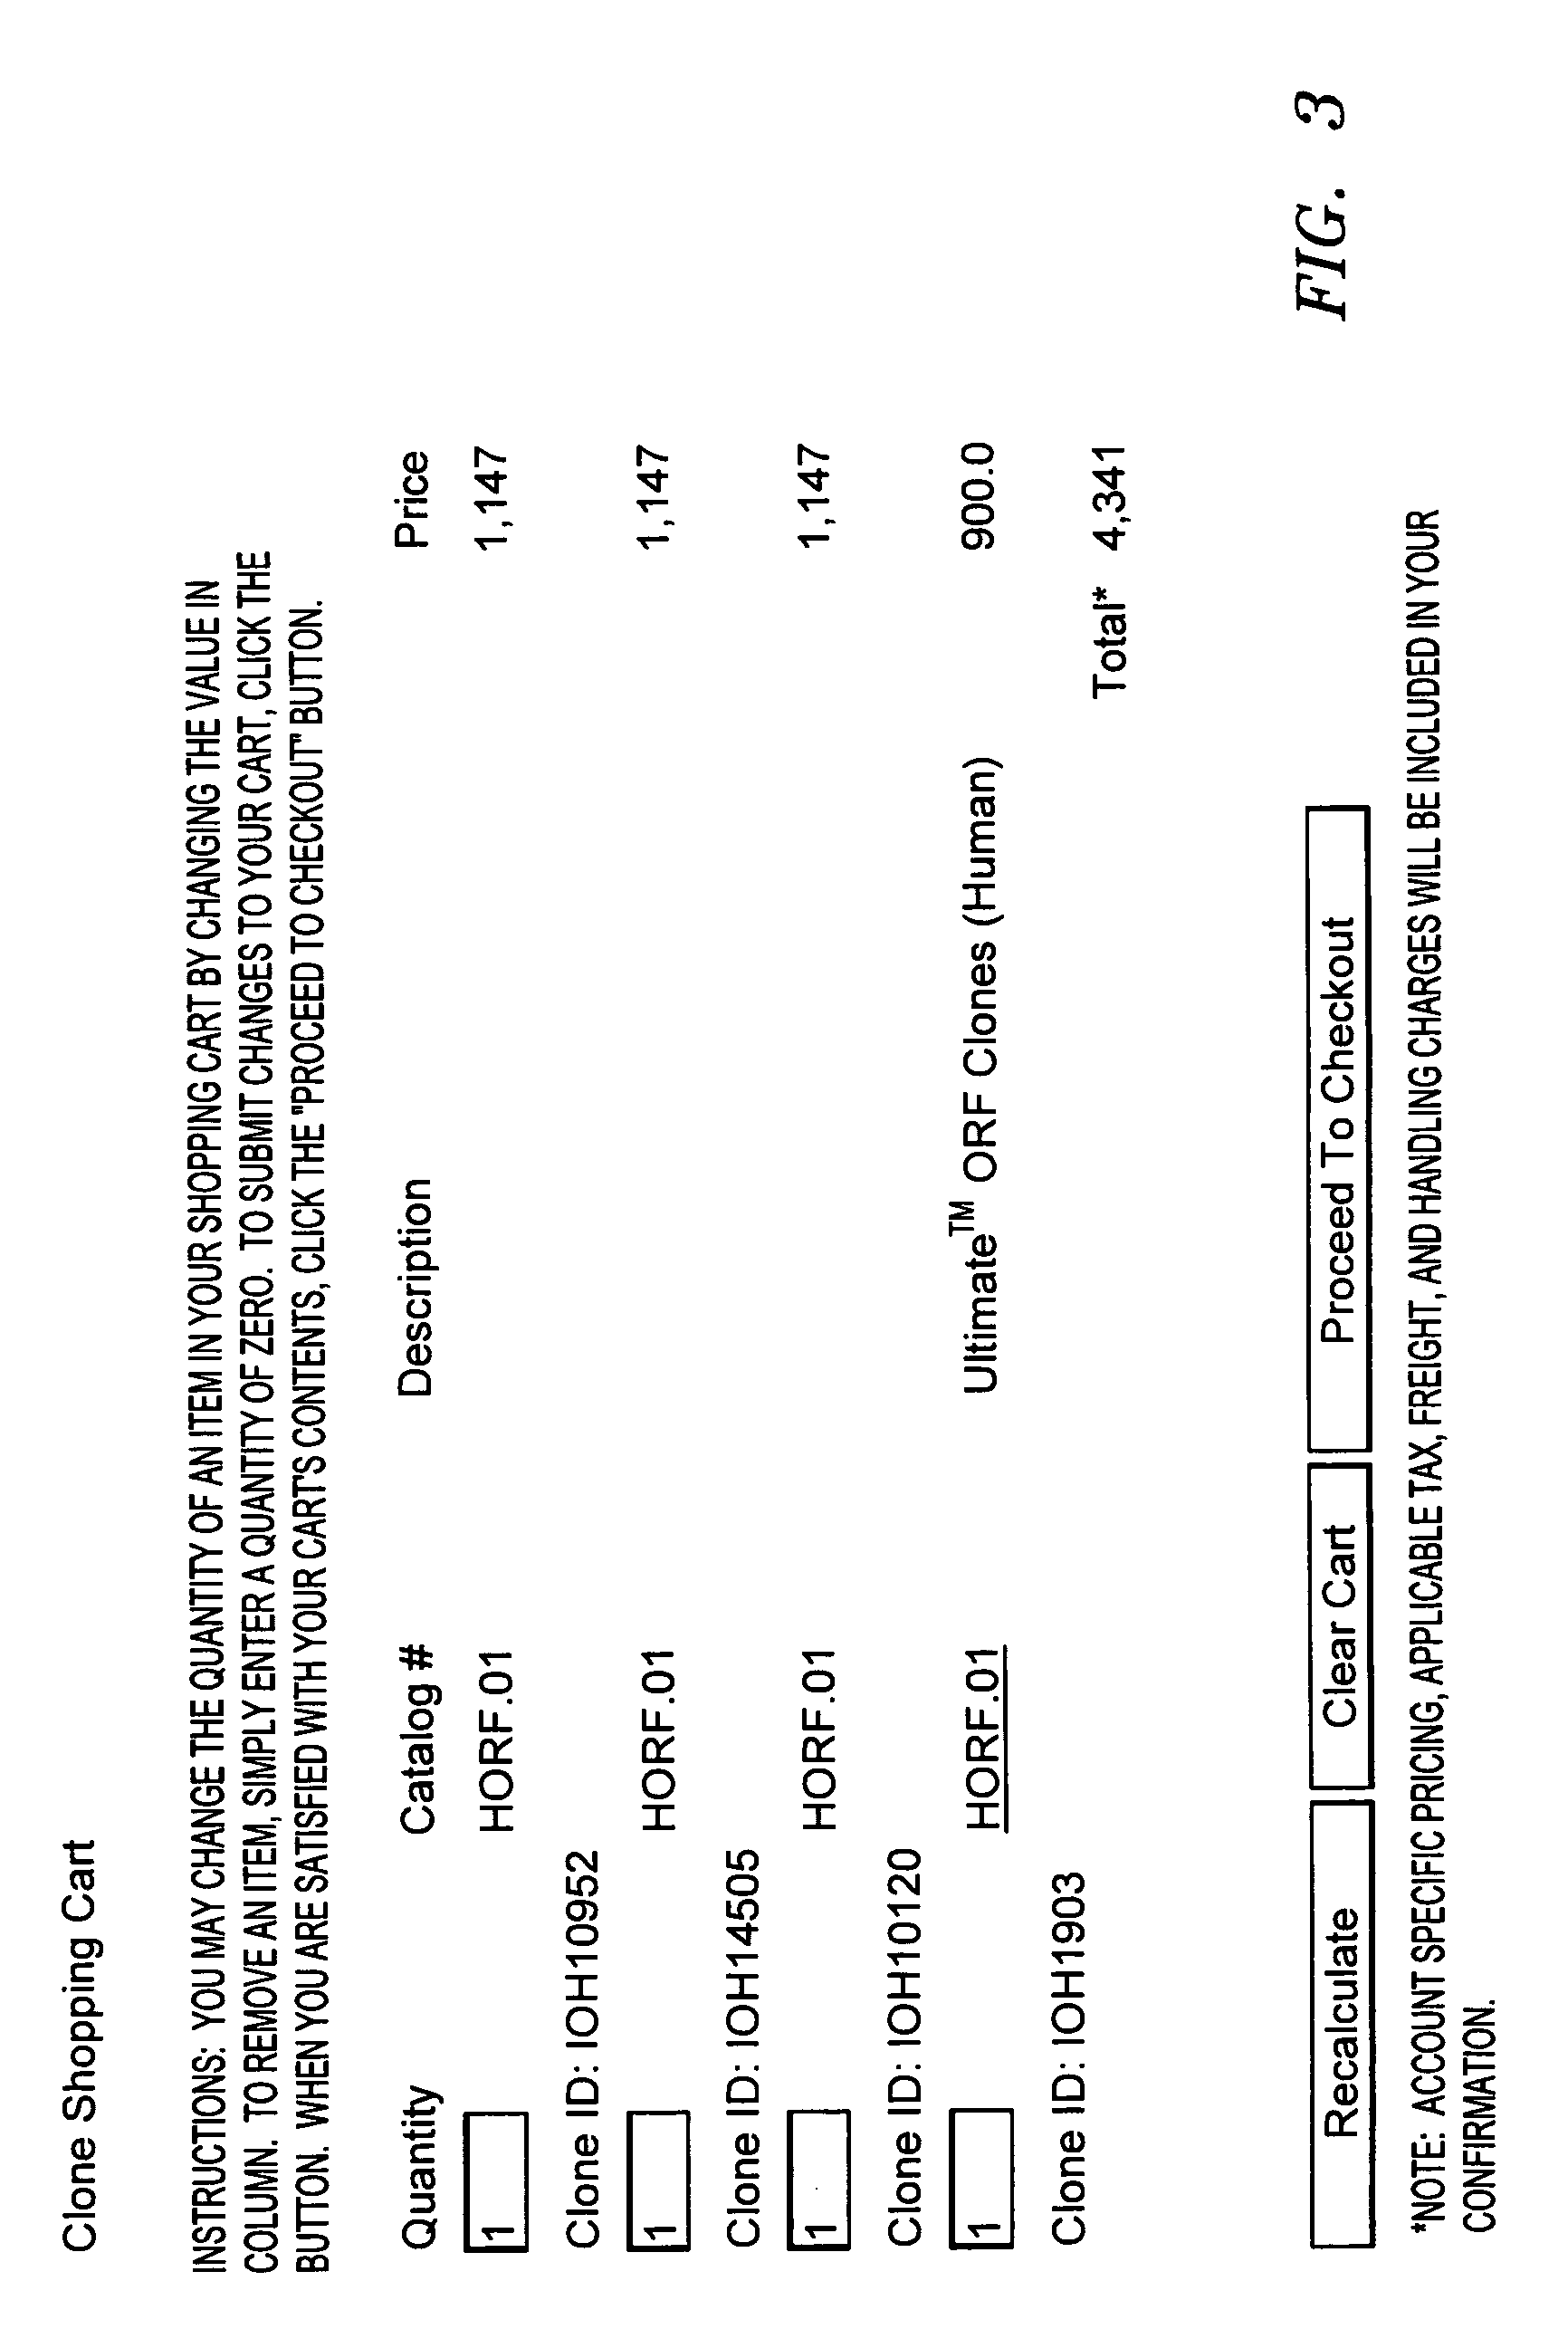 Collections of matched biological reagents and methods for identifying matched reagents